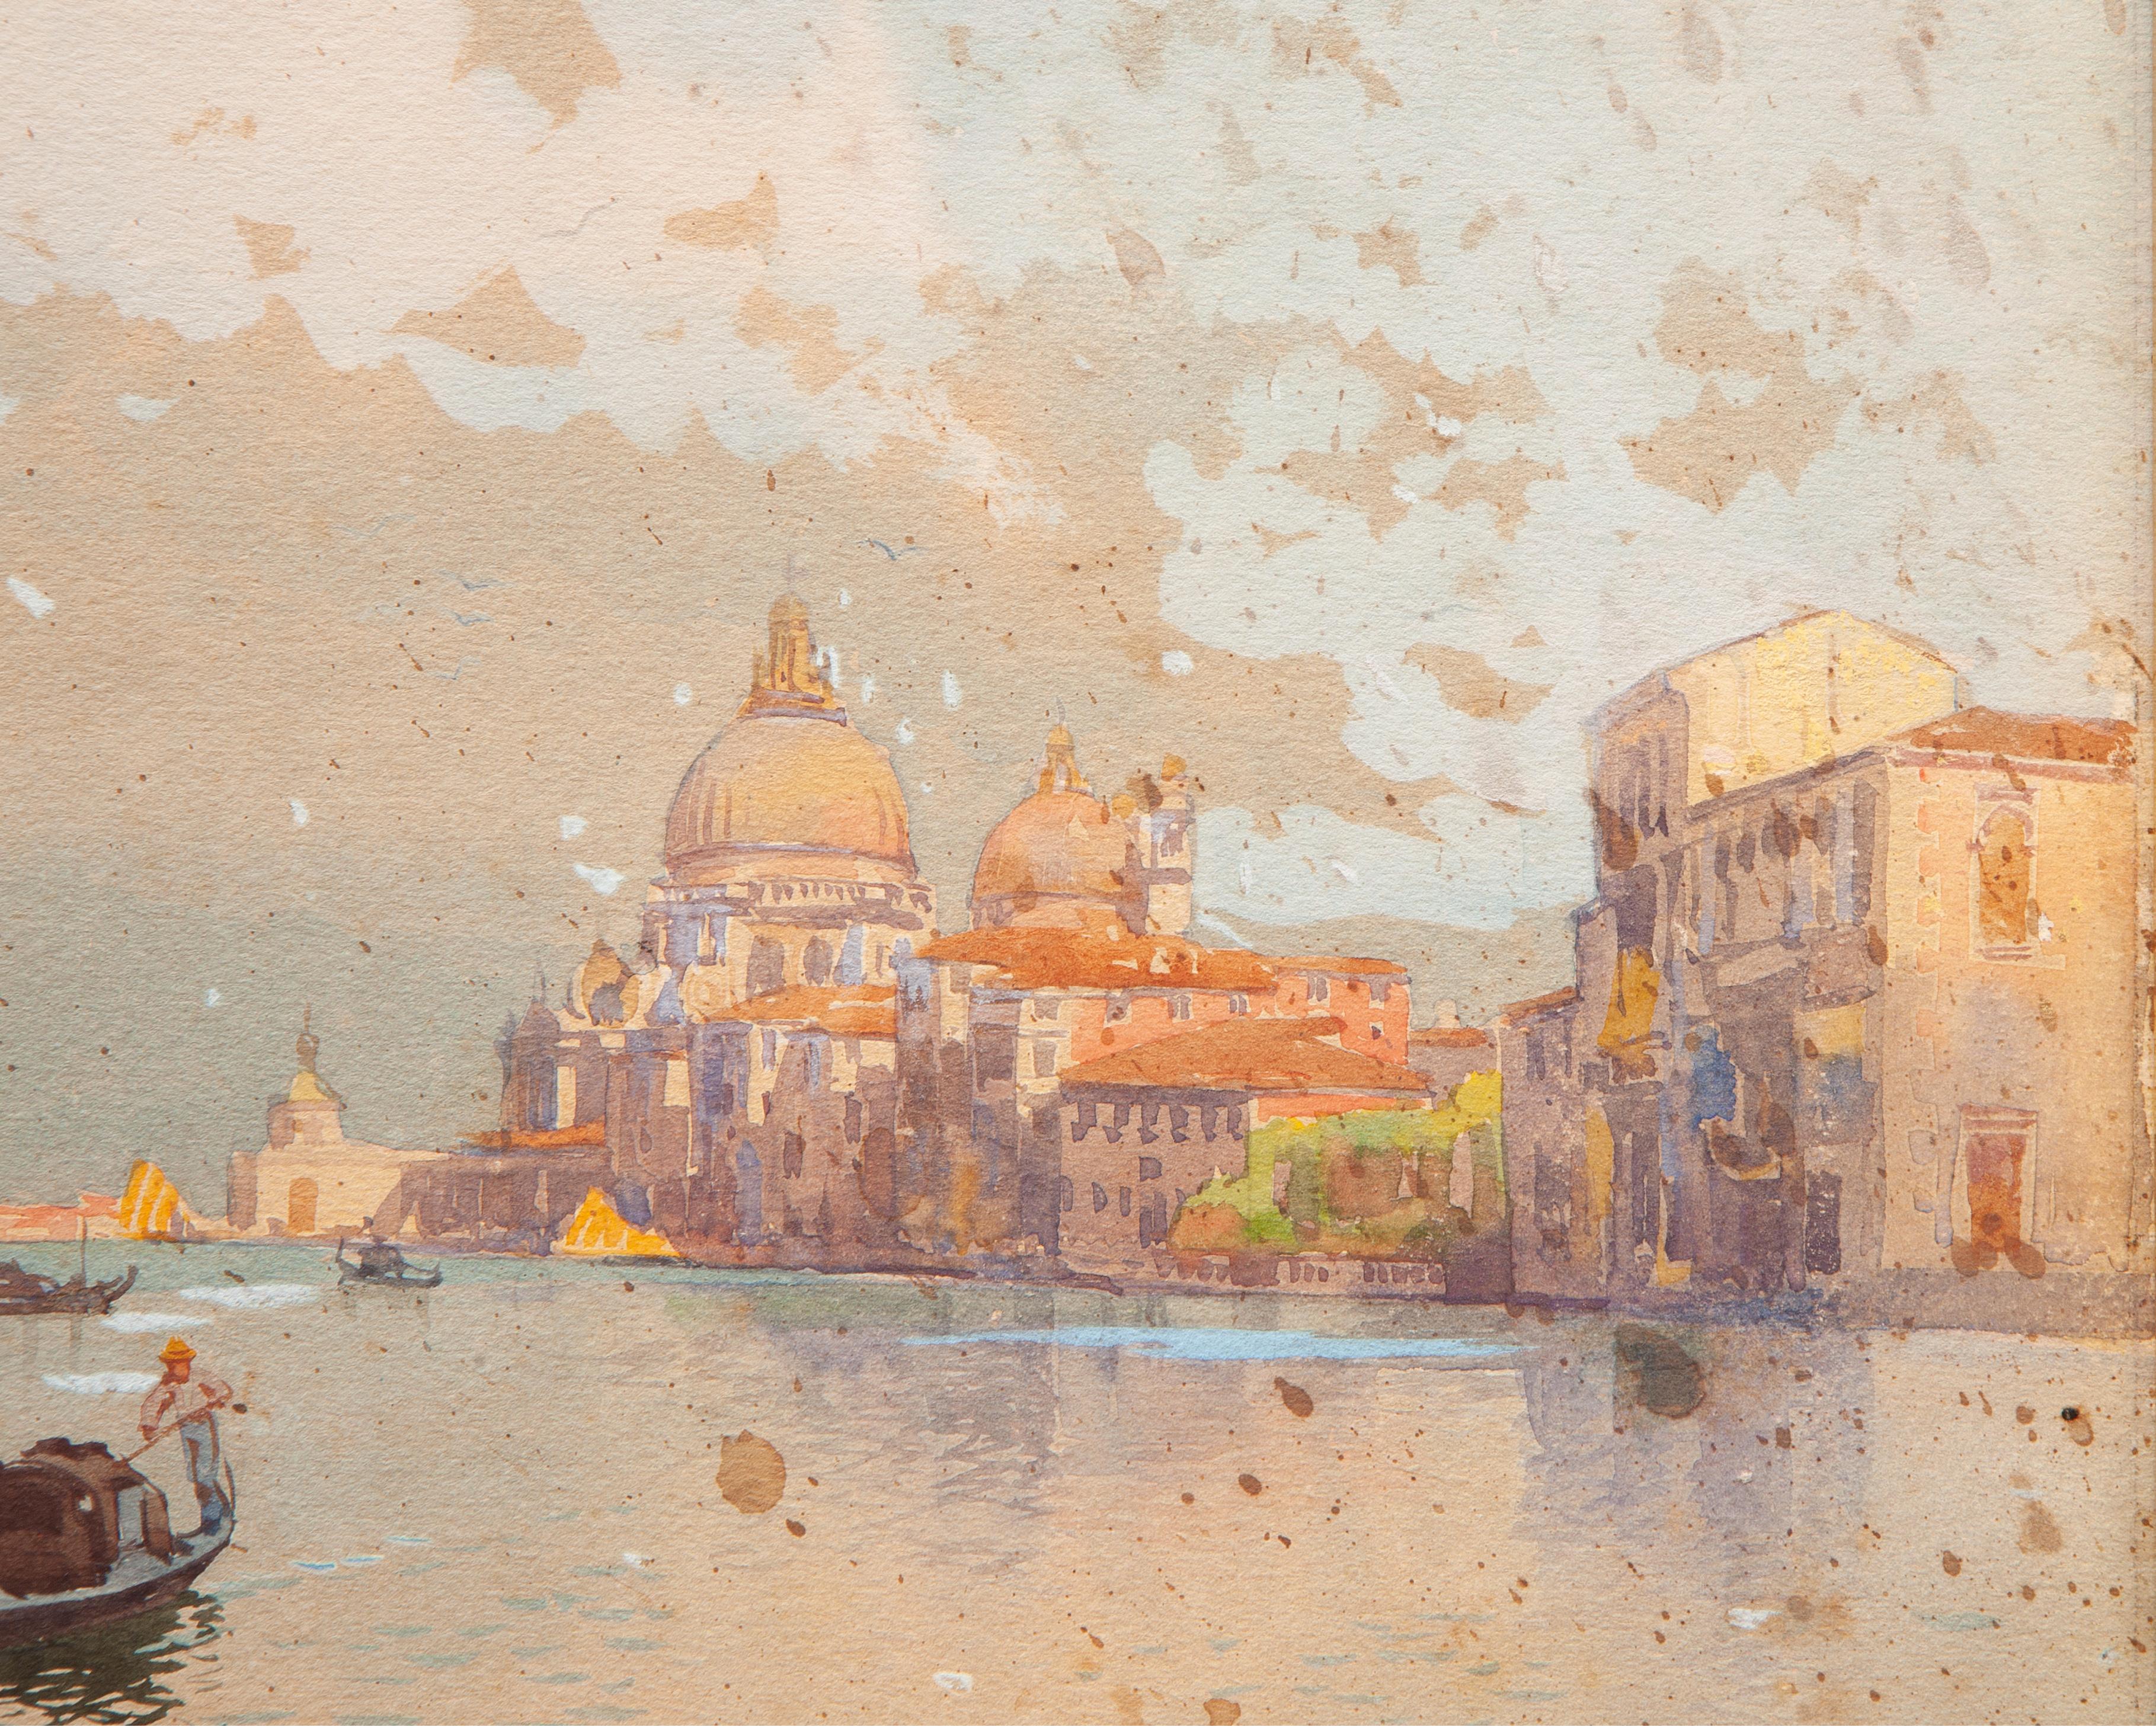 Gian Luciano Sormani (1867-1938)

‘Canal Grande in Venice’
Watercolor on paper
Gilt frame and invisible glass.
Size: 31x45 cm ( 57x70 cm including frame)
Period: Early 20th century

Gian Luciano Sormani was born in Legnago (Verona) in 1867 and died